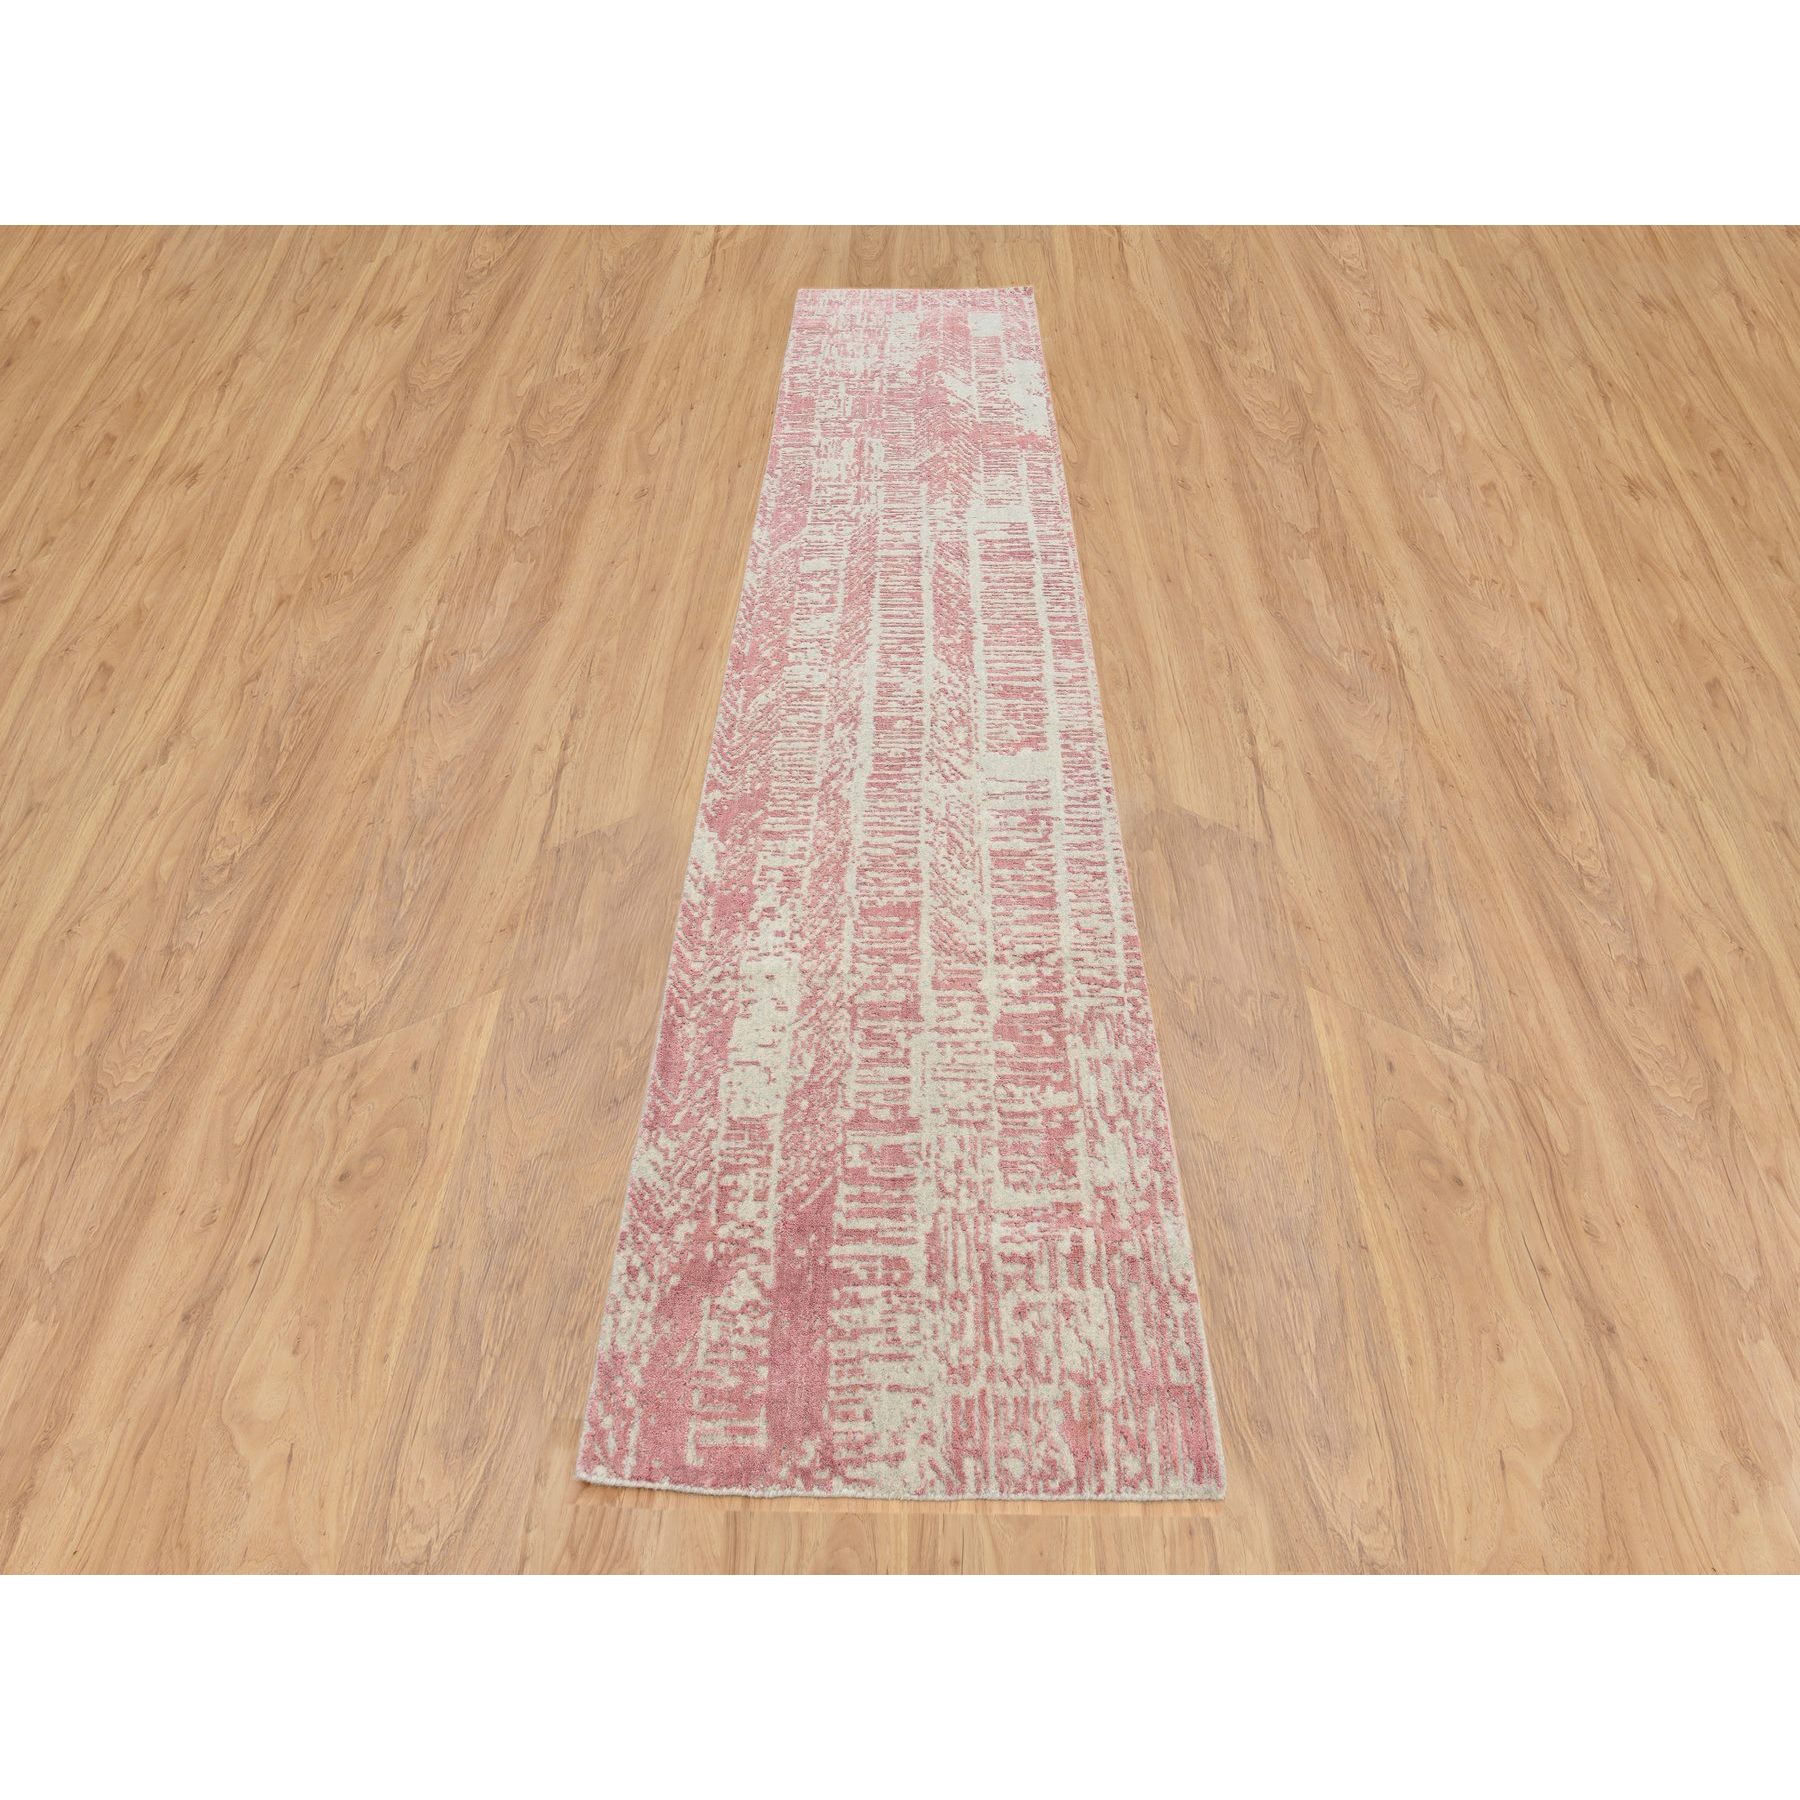 2'6"x12'1" Rose Pink, Wool and Art Silk Jacquard Hand Loomed, All Over Design, Runner Oriental Rug 